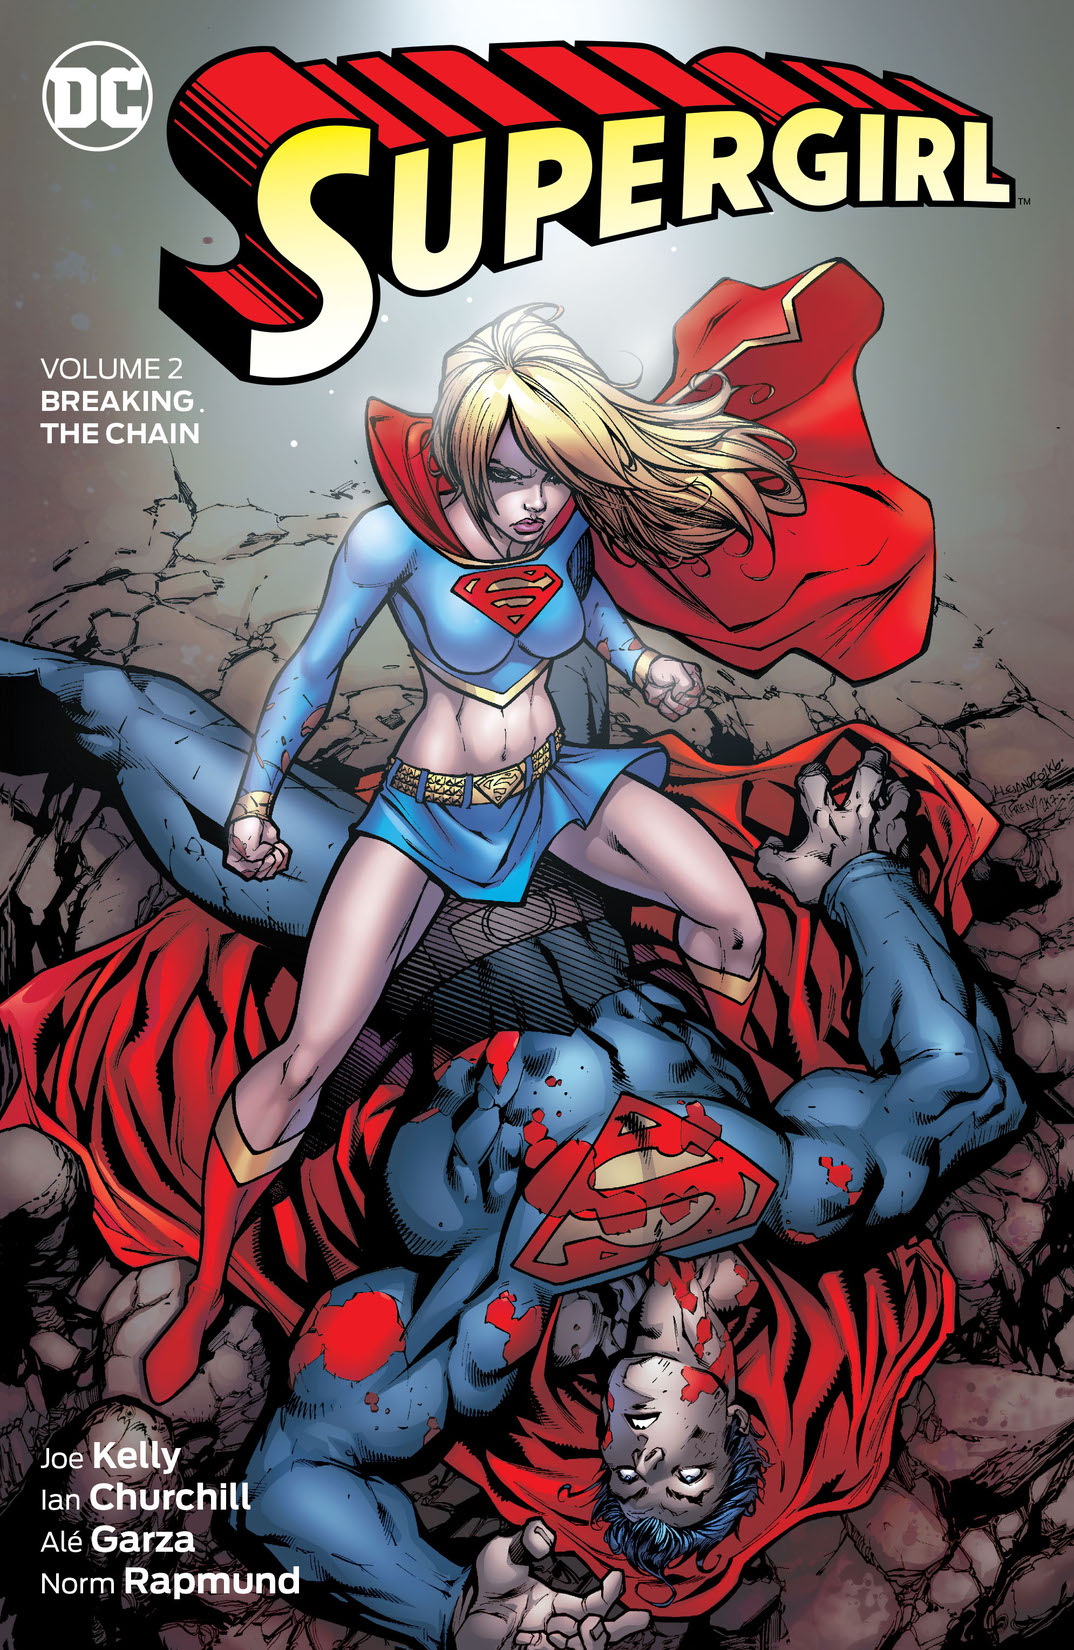 Supergirl Vol. 2: Breaking the Chain preview images